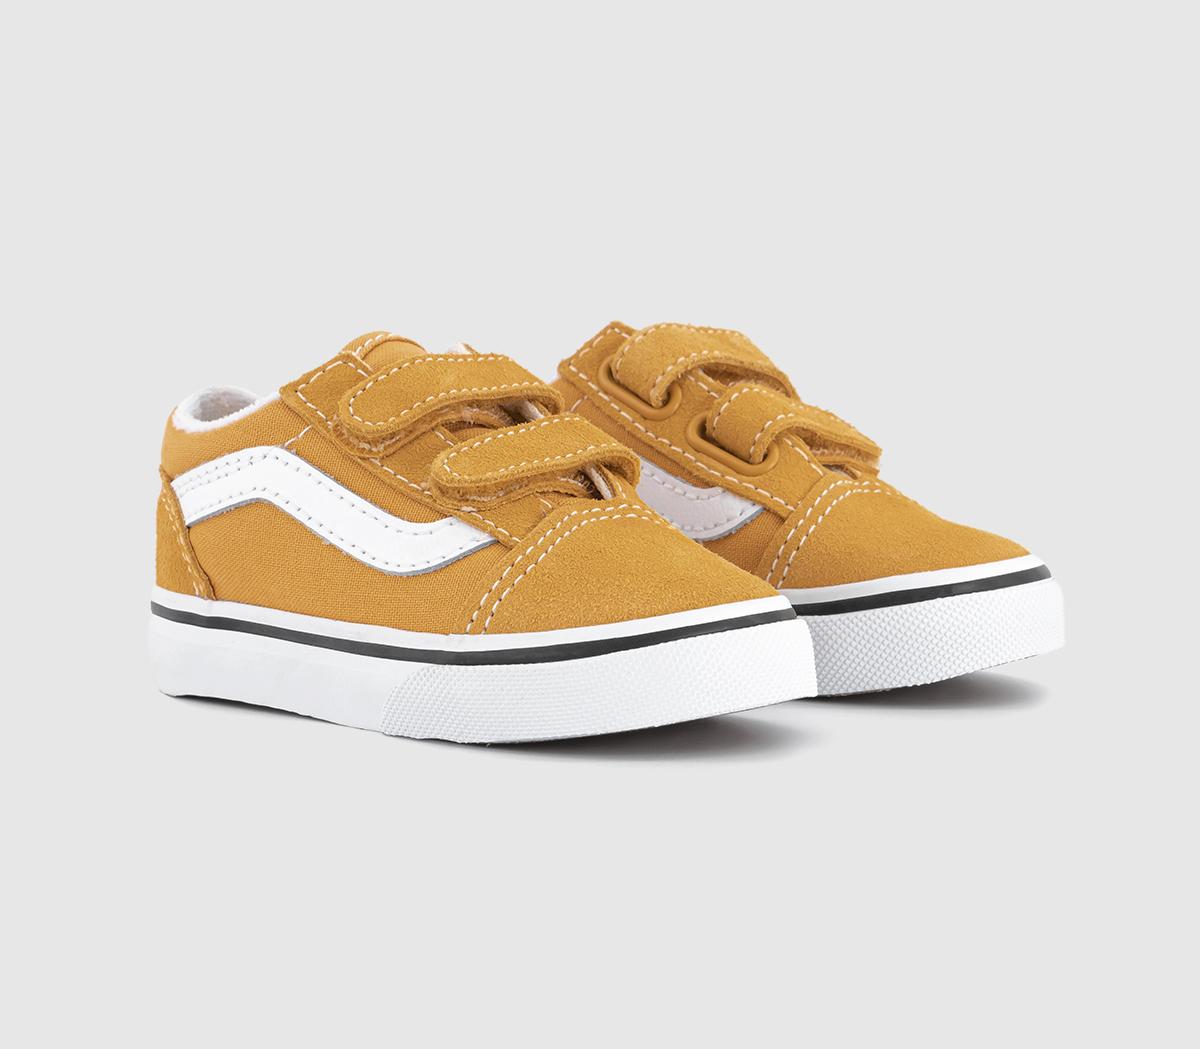 Vans Kids Old Skool Toddler Trainers Color Theory Golden Glow Gold/White, 5infant